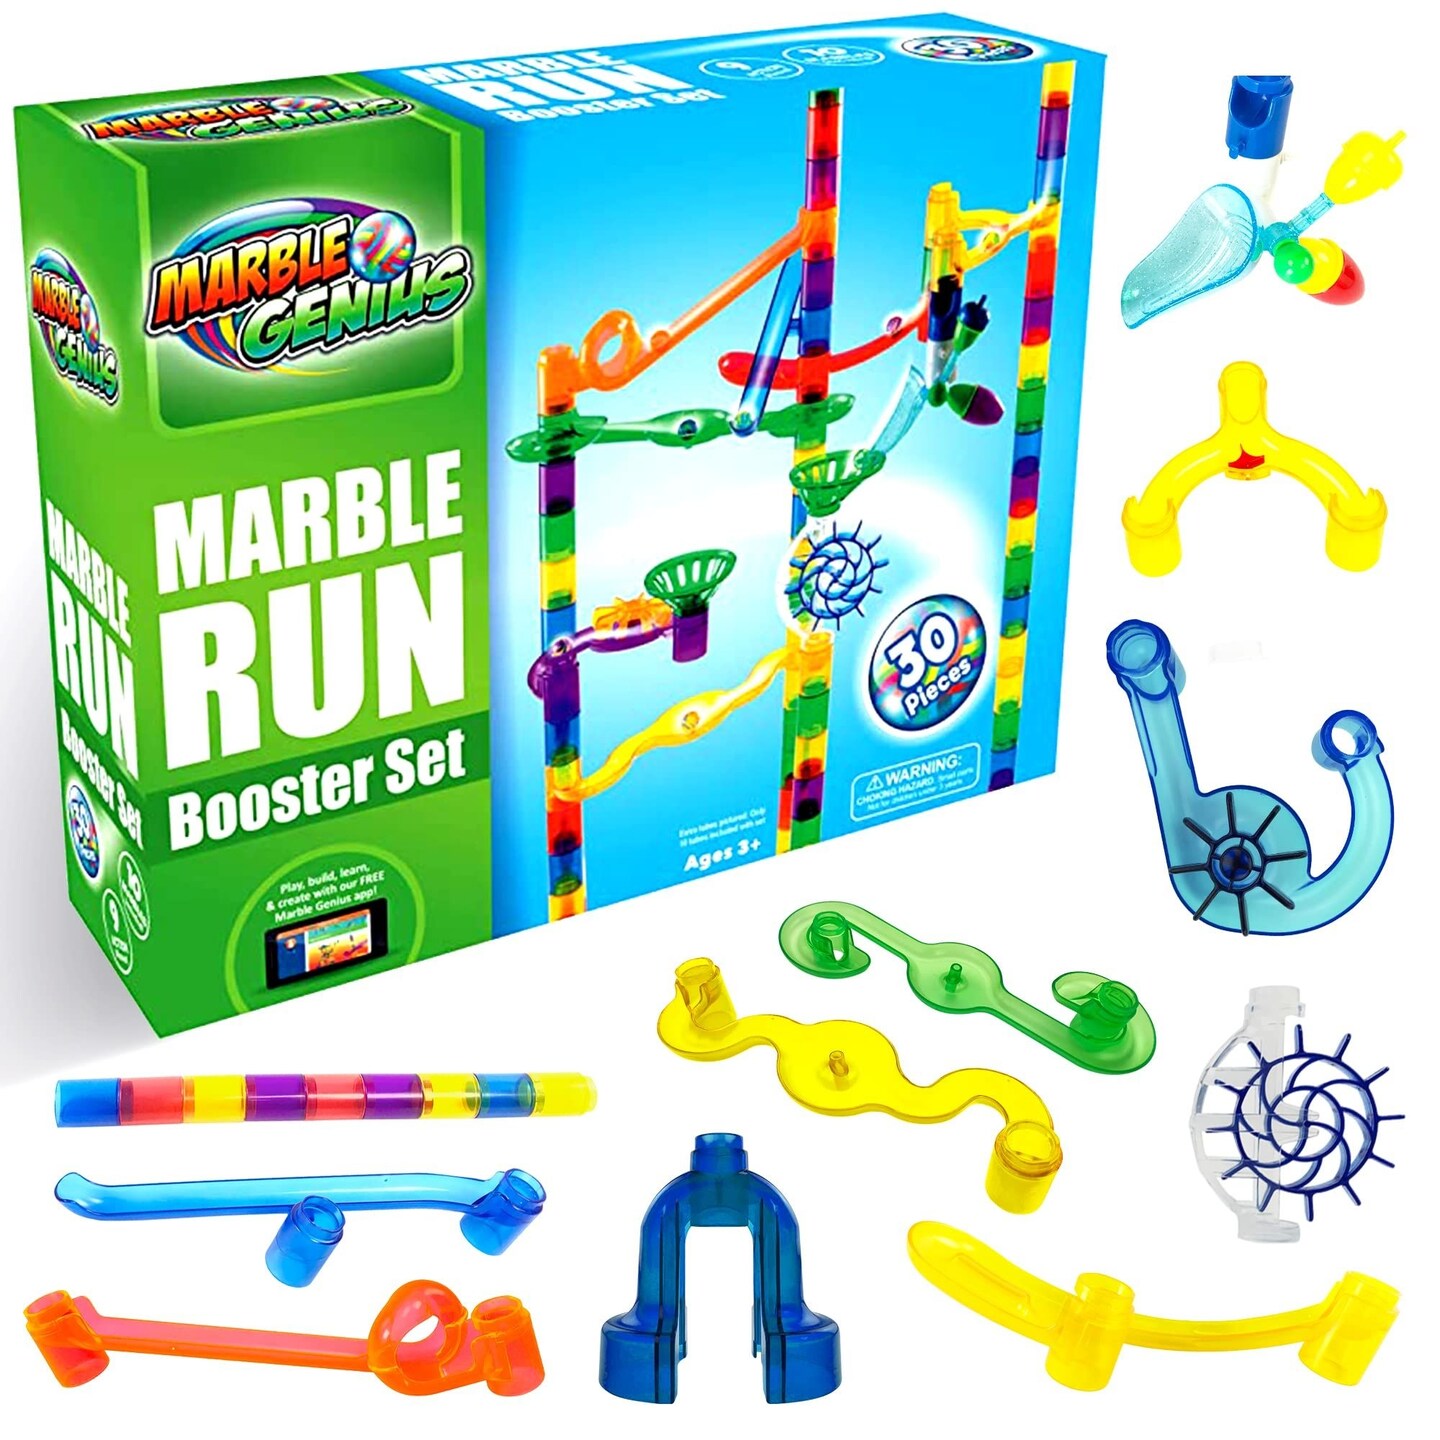 Marble Genius Marble Run Booster Set - 30 Pieces Total (10 Action Pieces Included), Construction Building Blocks Toys for Ages 3 and Above, with Instruction App Access, Add-On Set, Original